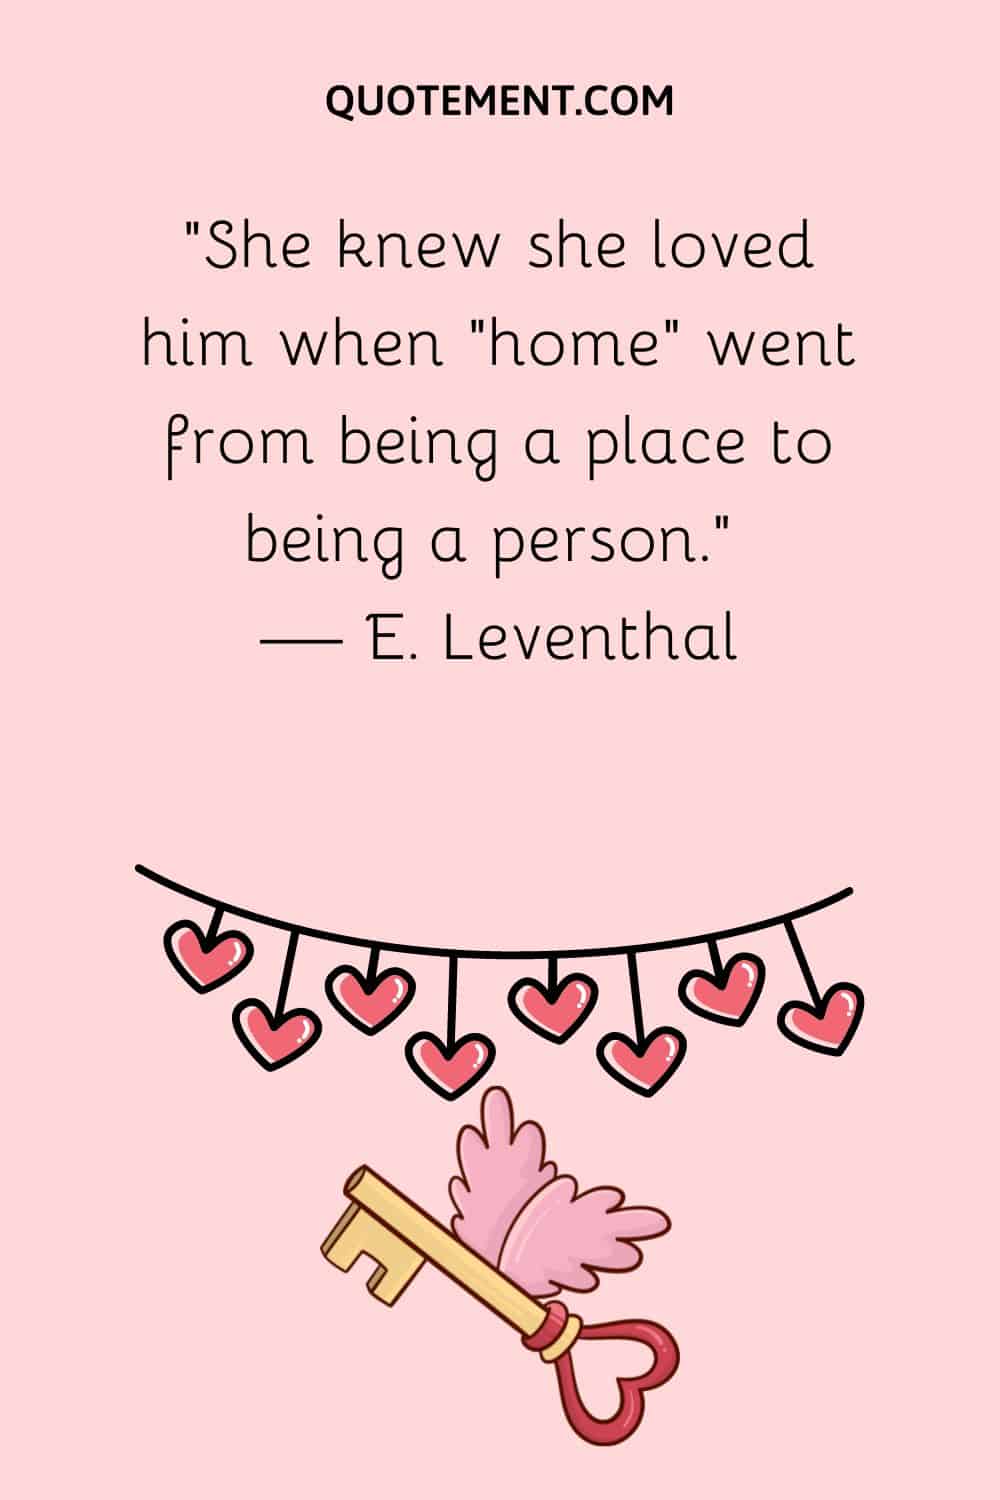 “She knew she loved him when “home” went from being a place to being a person.” — E. Leventhal